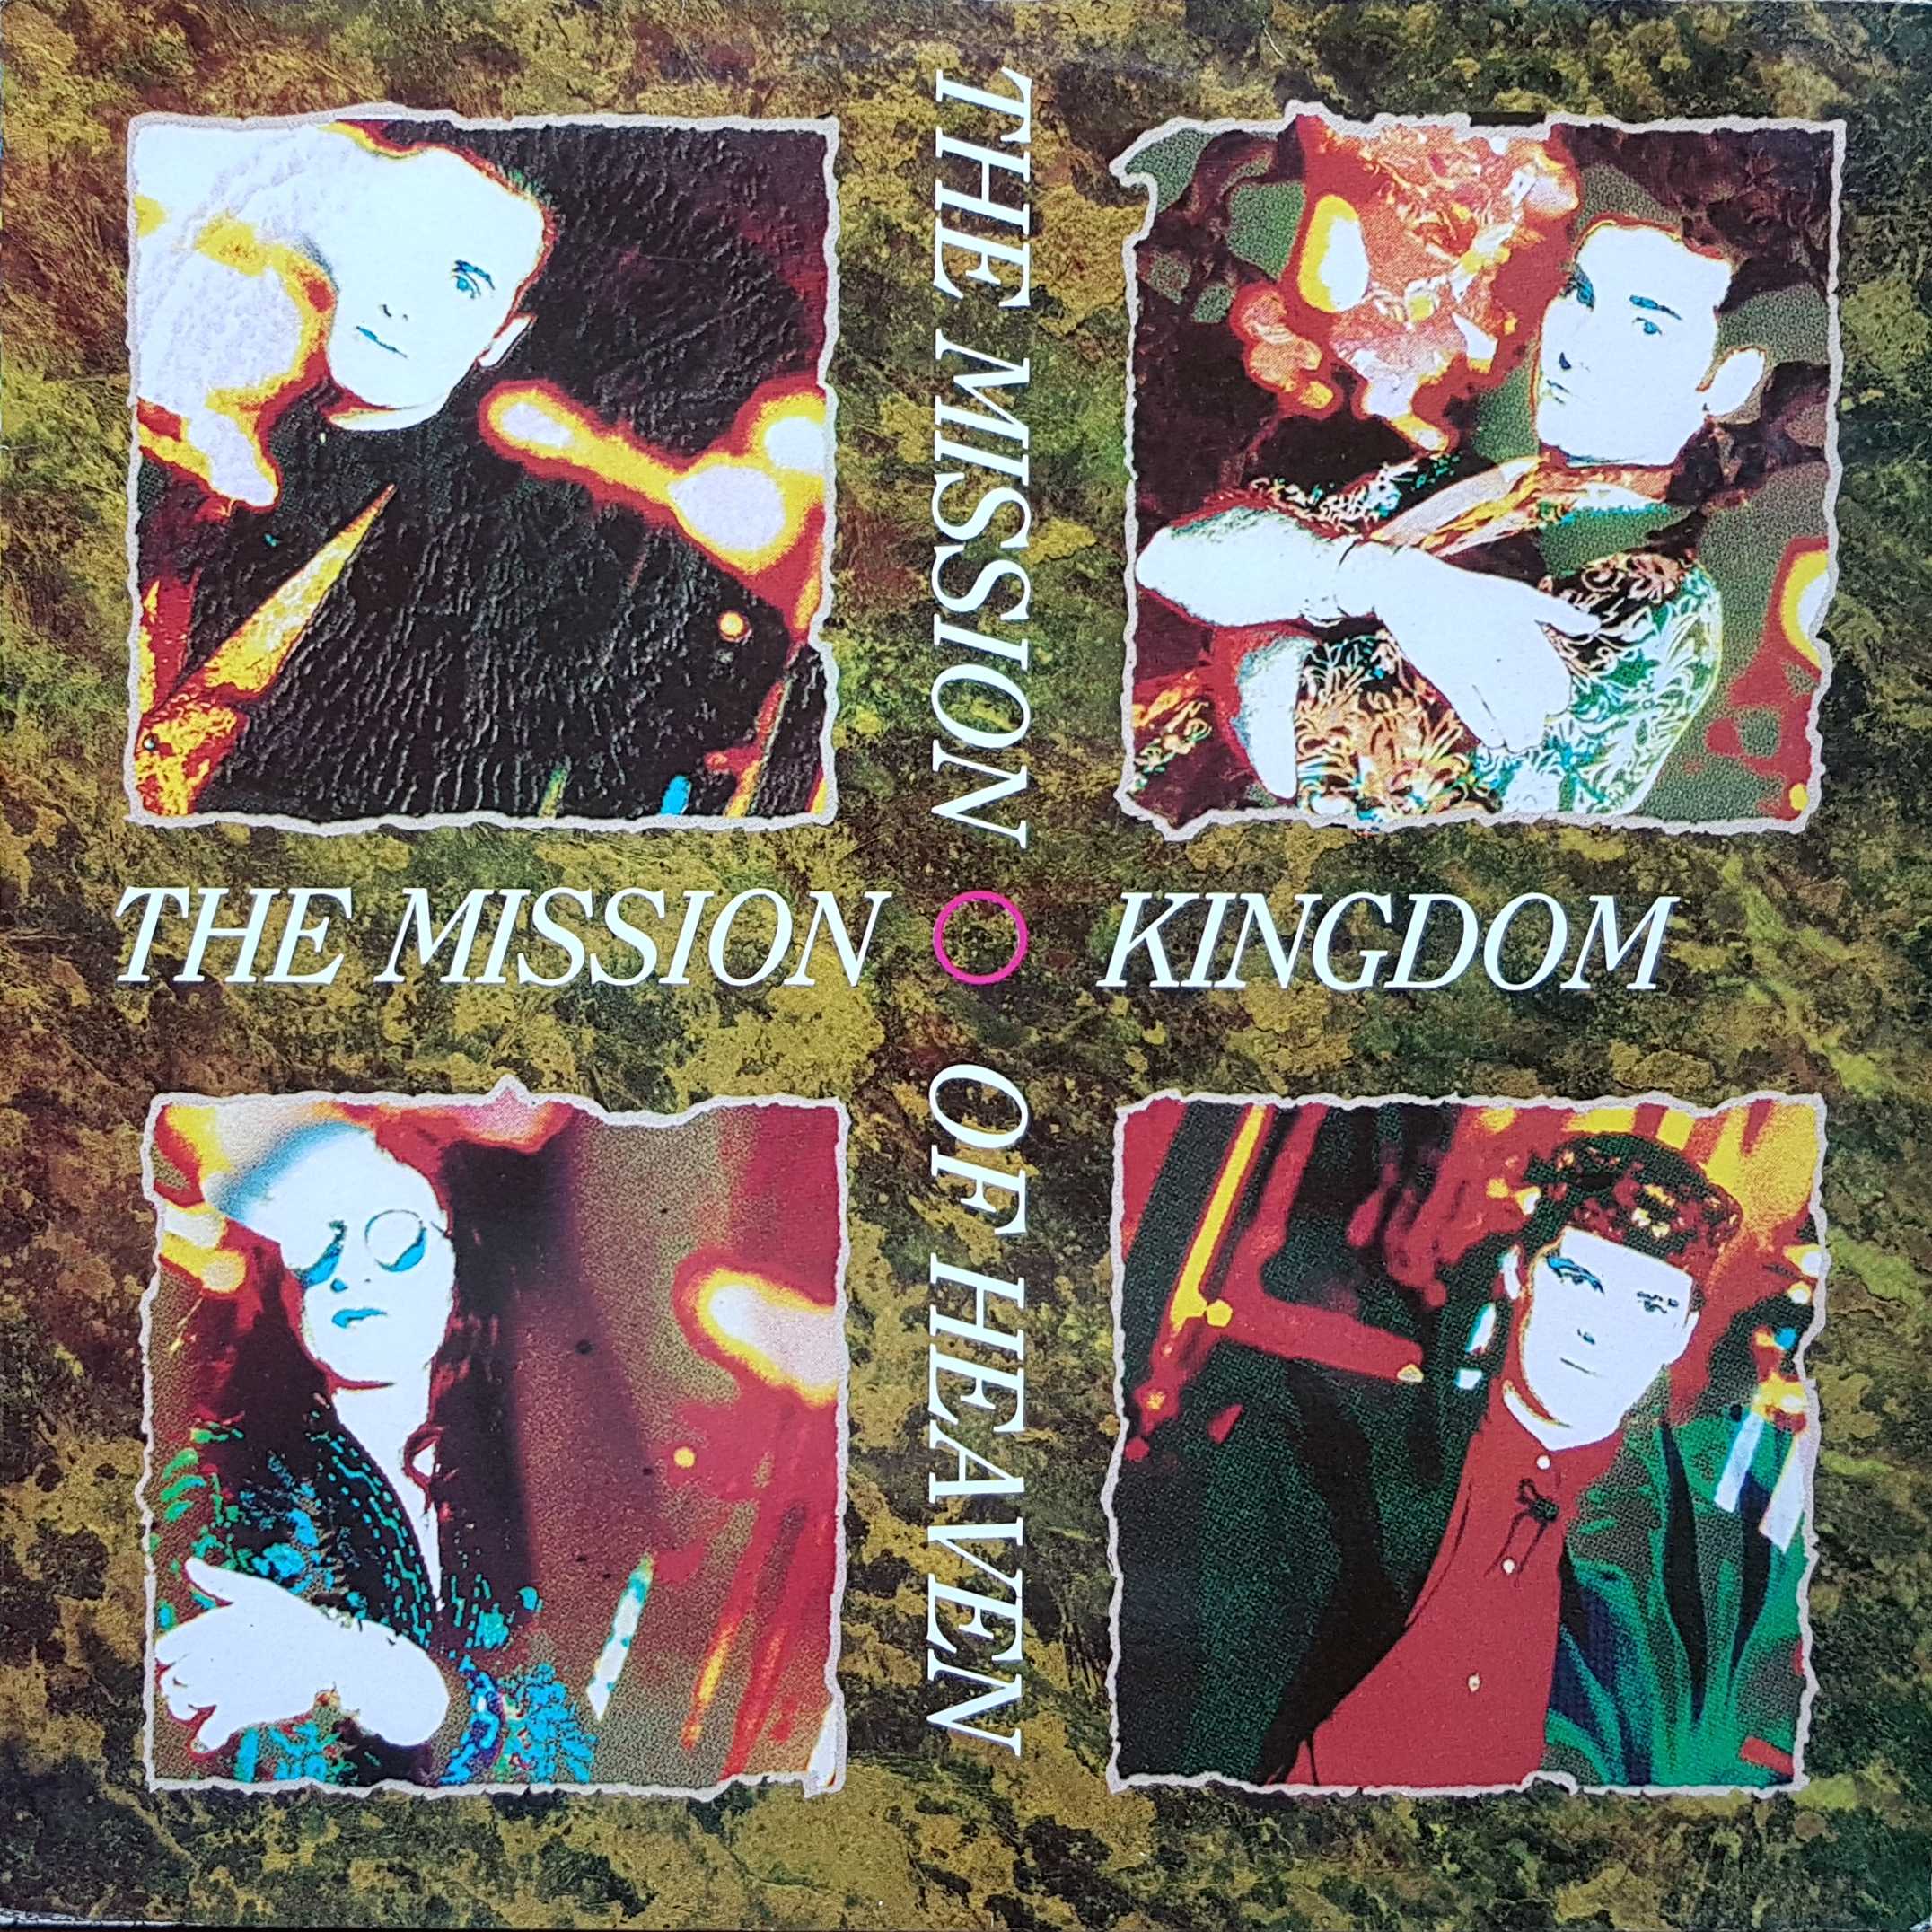 Picture of CN 5294 S The Mission - In concert 452 (Re-issue) by artist The Mission from the BBC albums - Records and Tapes library